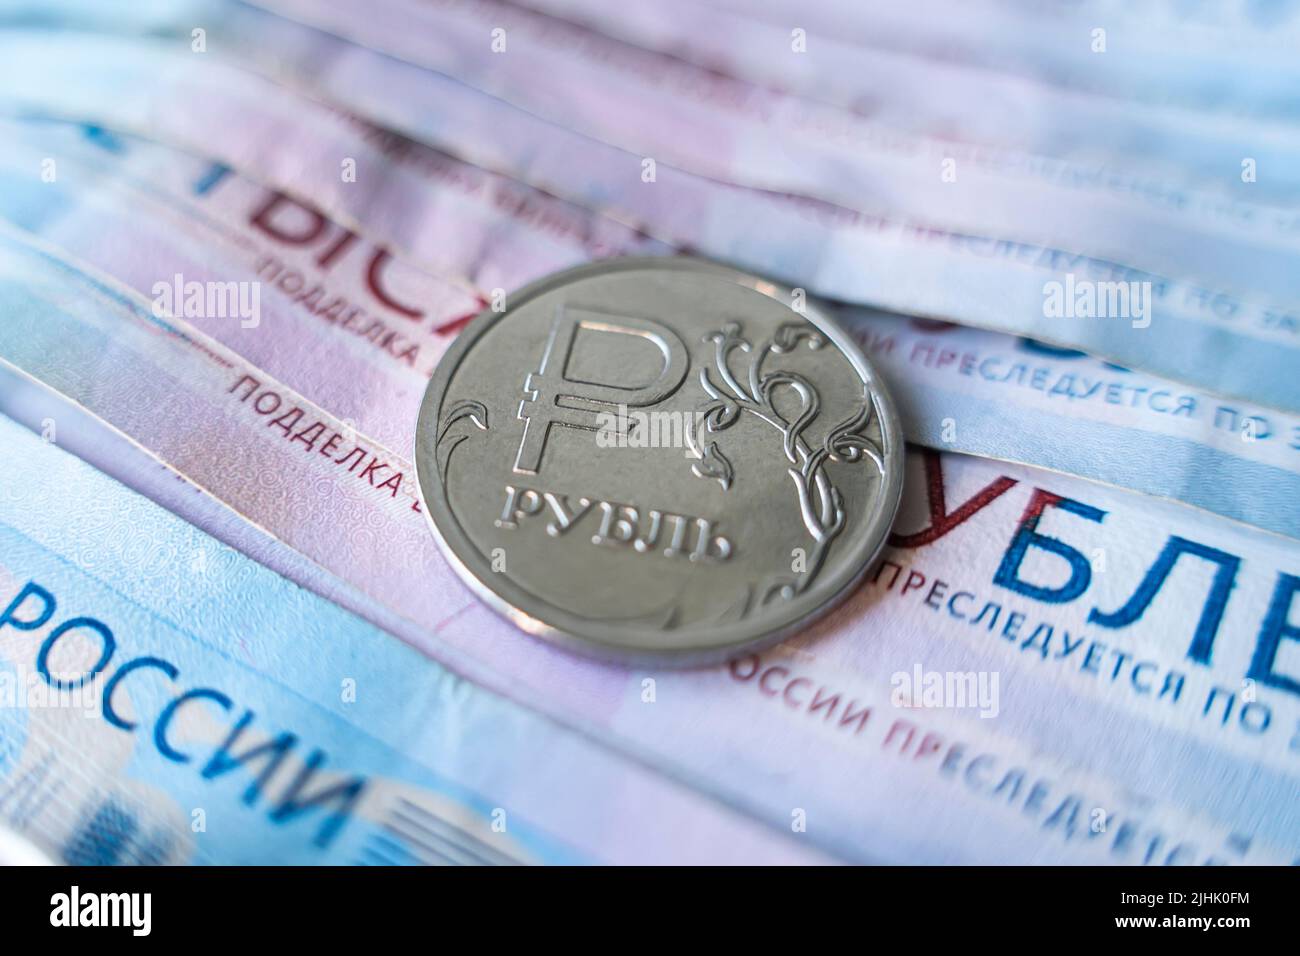 Economic crisis, decline of world economy. Ruble devaluation. fall of Russian currency. Currency exchange. ruble symbol on the coin Stock Photo